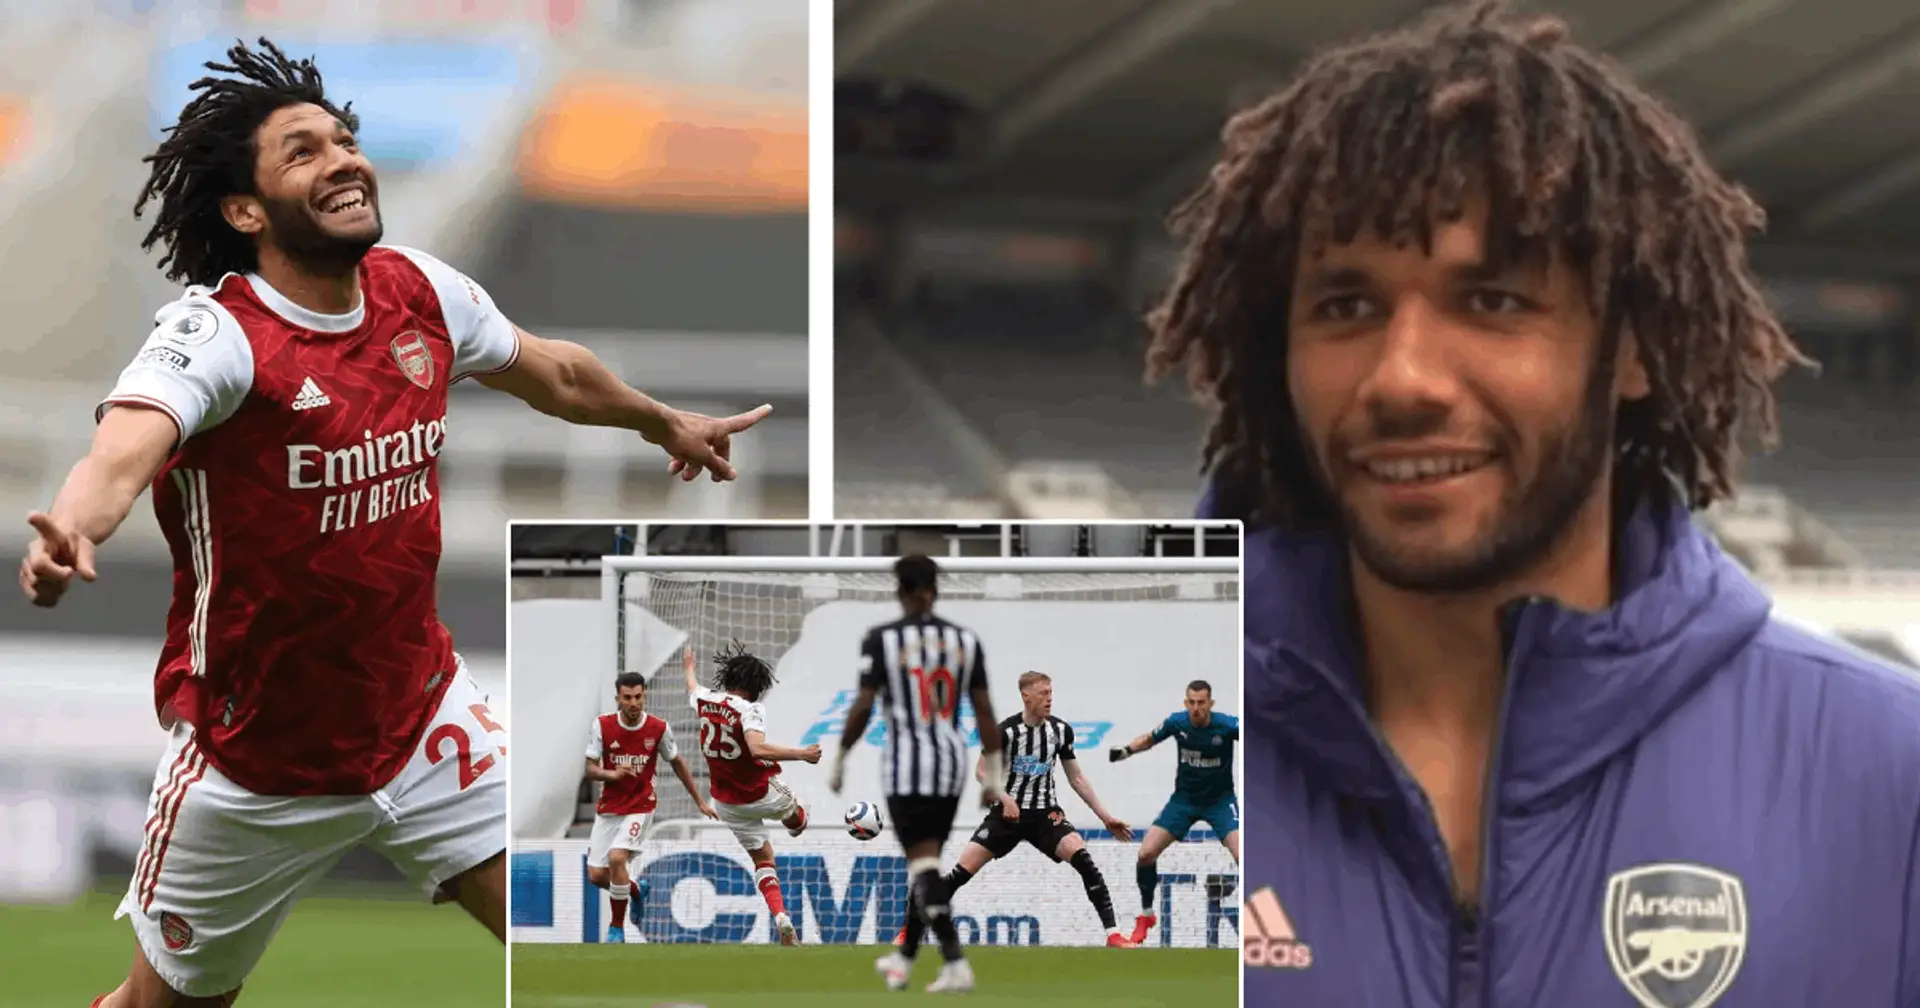 'I keep always asking my friends to pray for me to score in the Premier League': Mo Elneny reacts to his first-ever PL goal